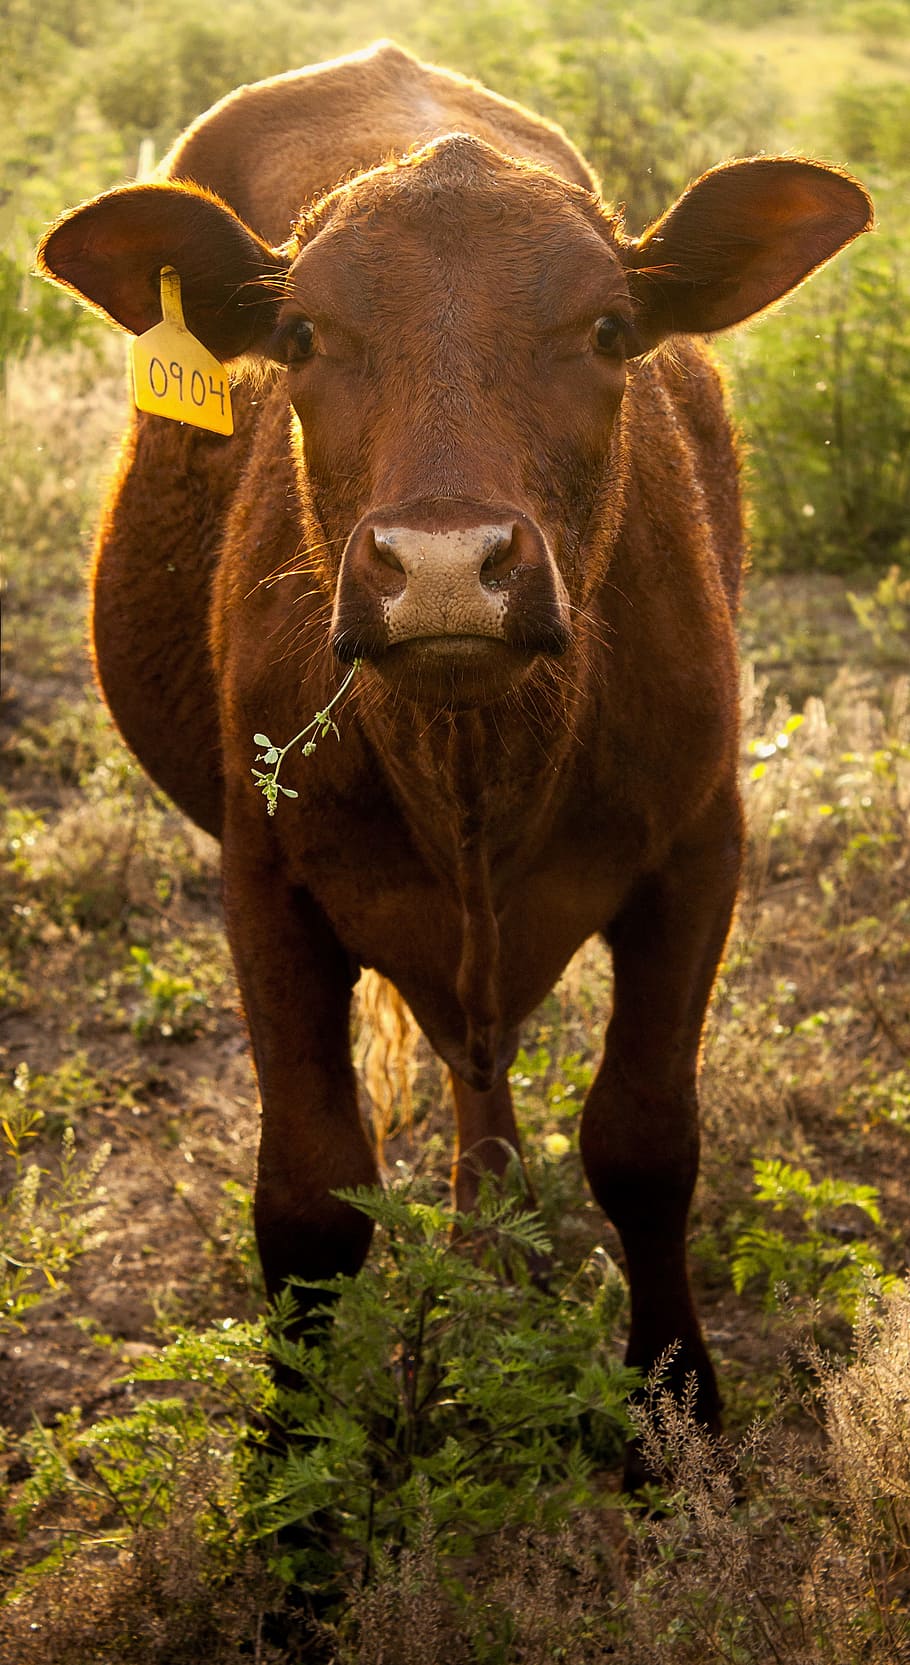 Cow, Tag, Tagged, Farm, Cattle, agriculture, beef, animal, livestock, farming